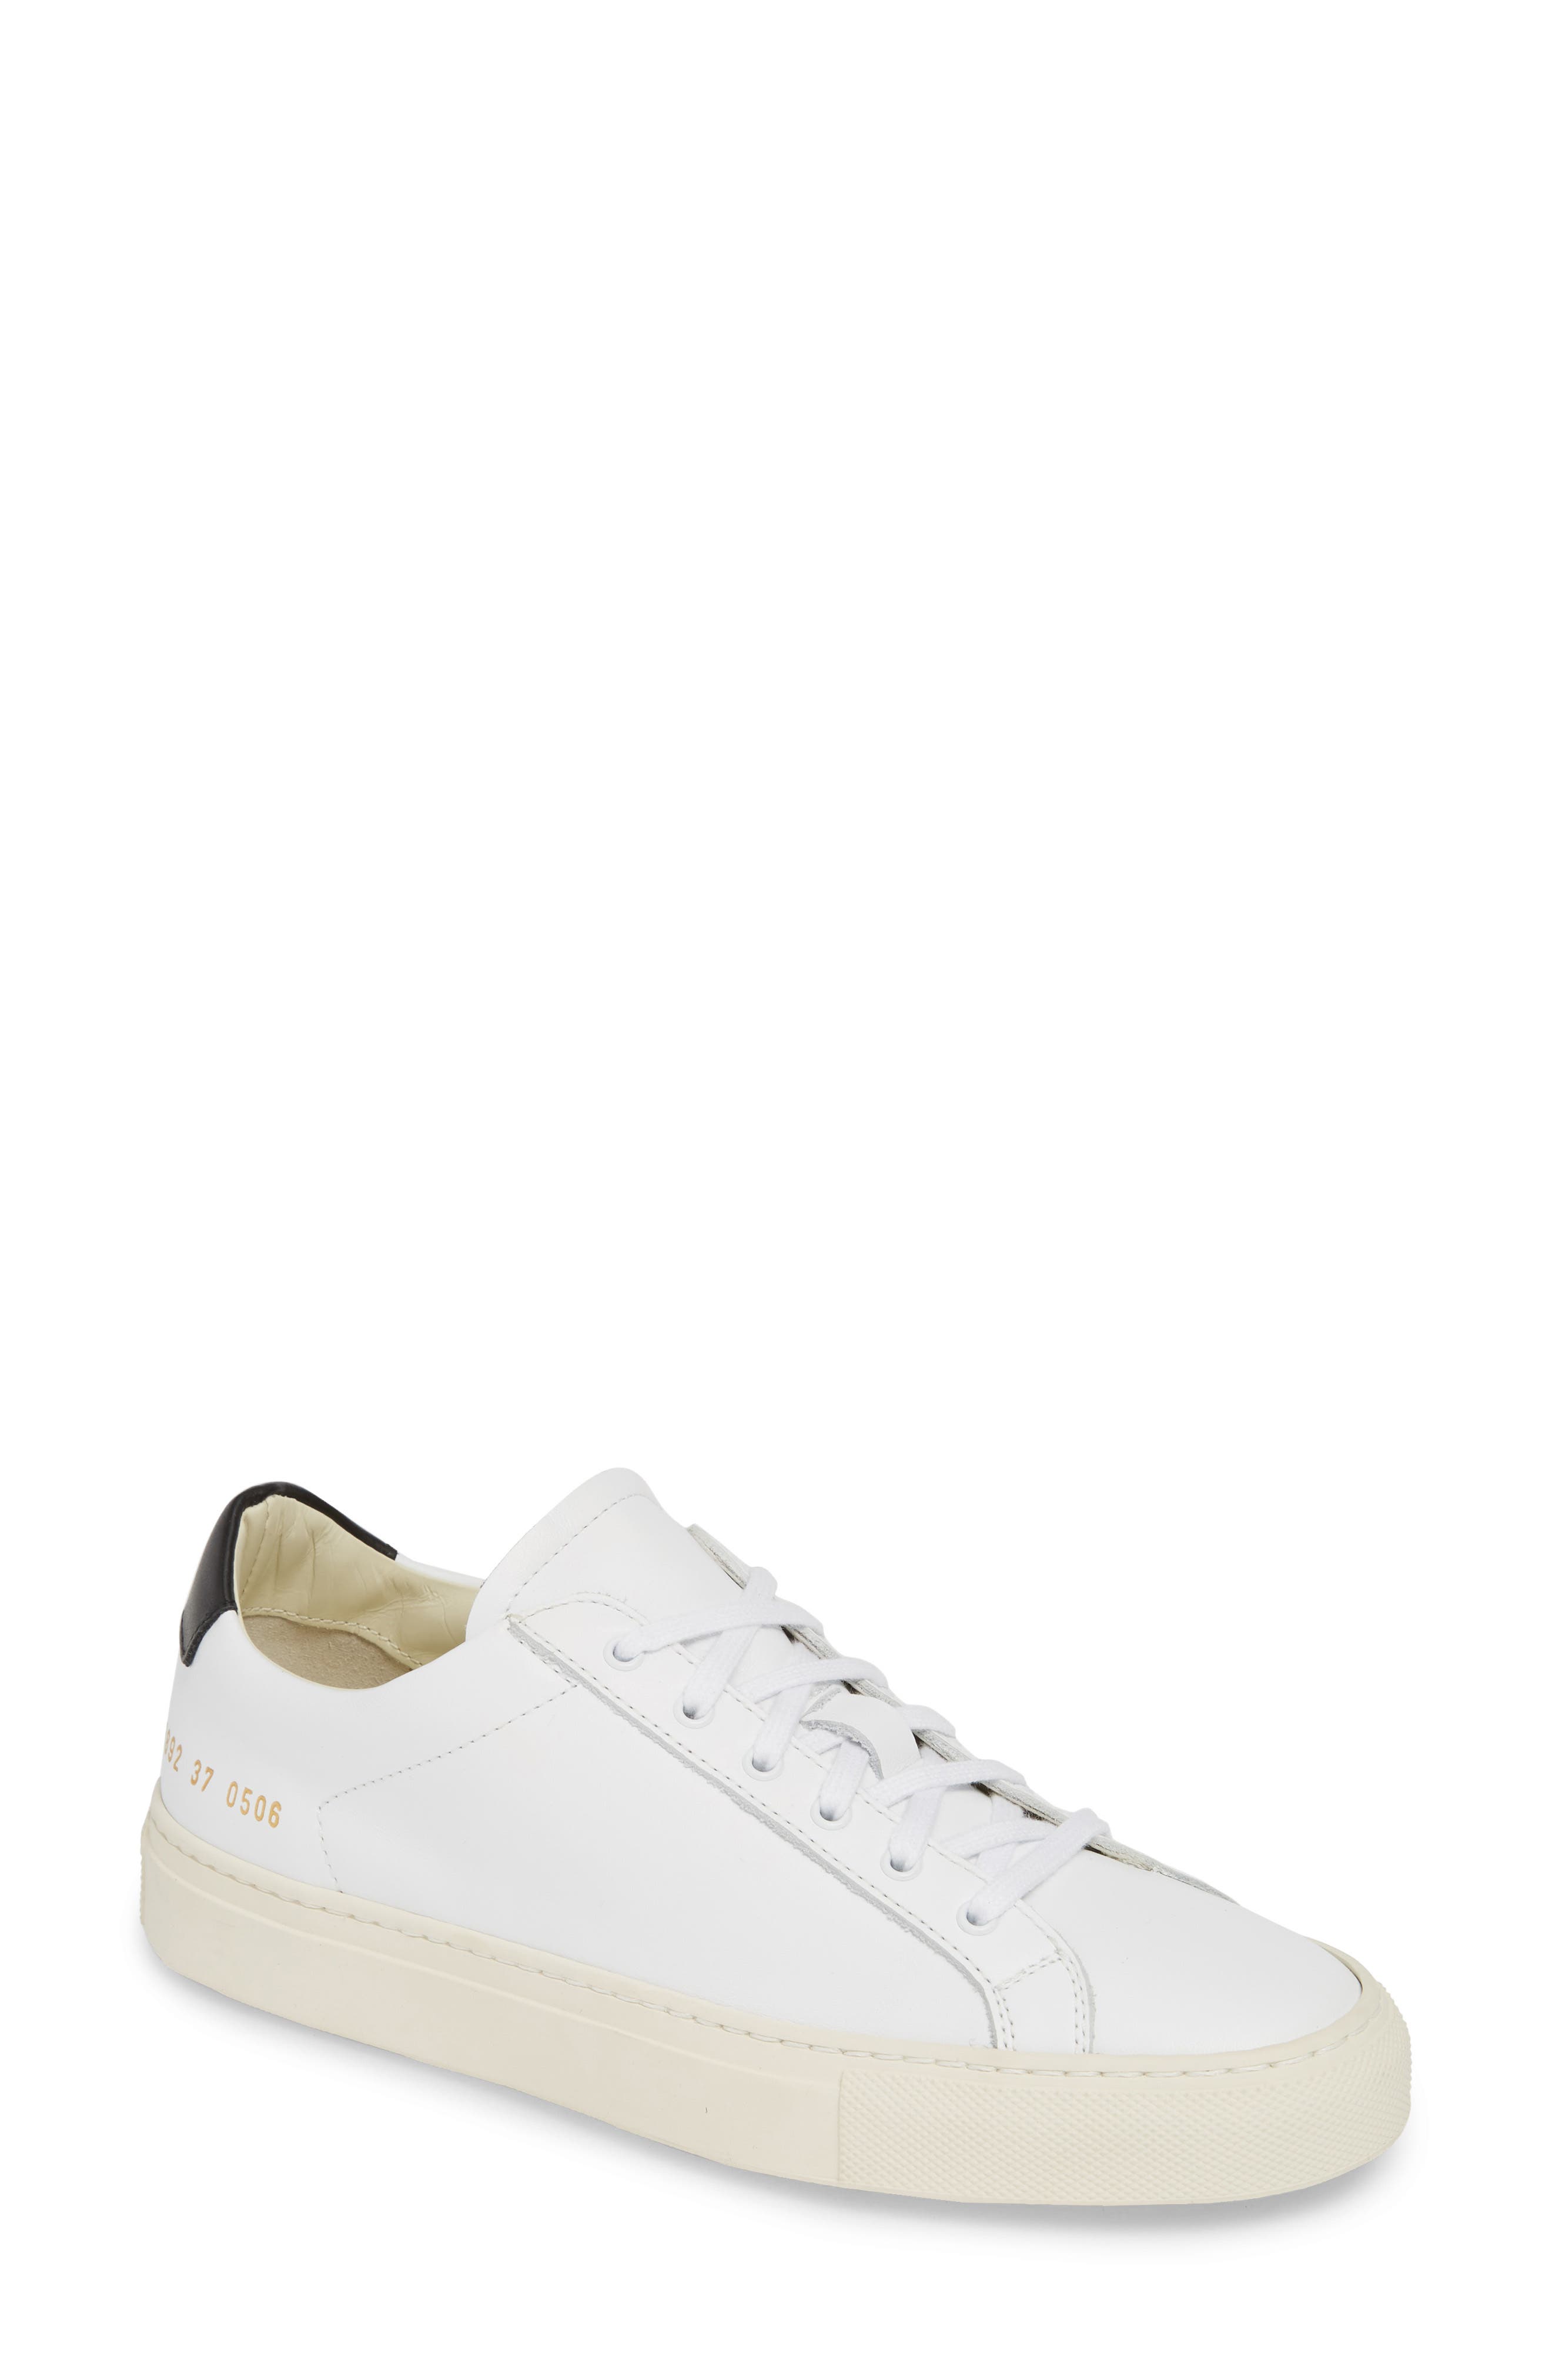 Common Projects | Nordstrom